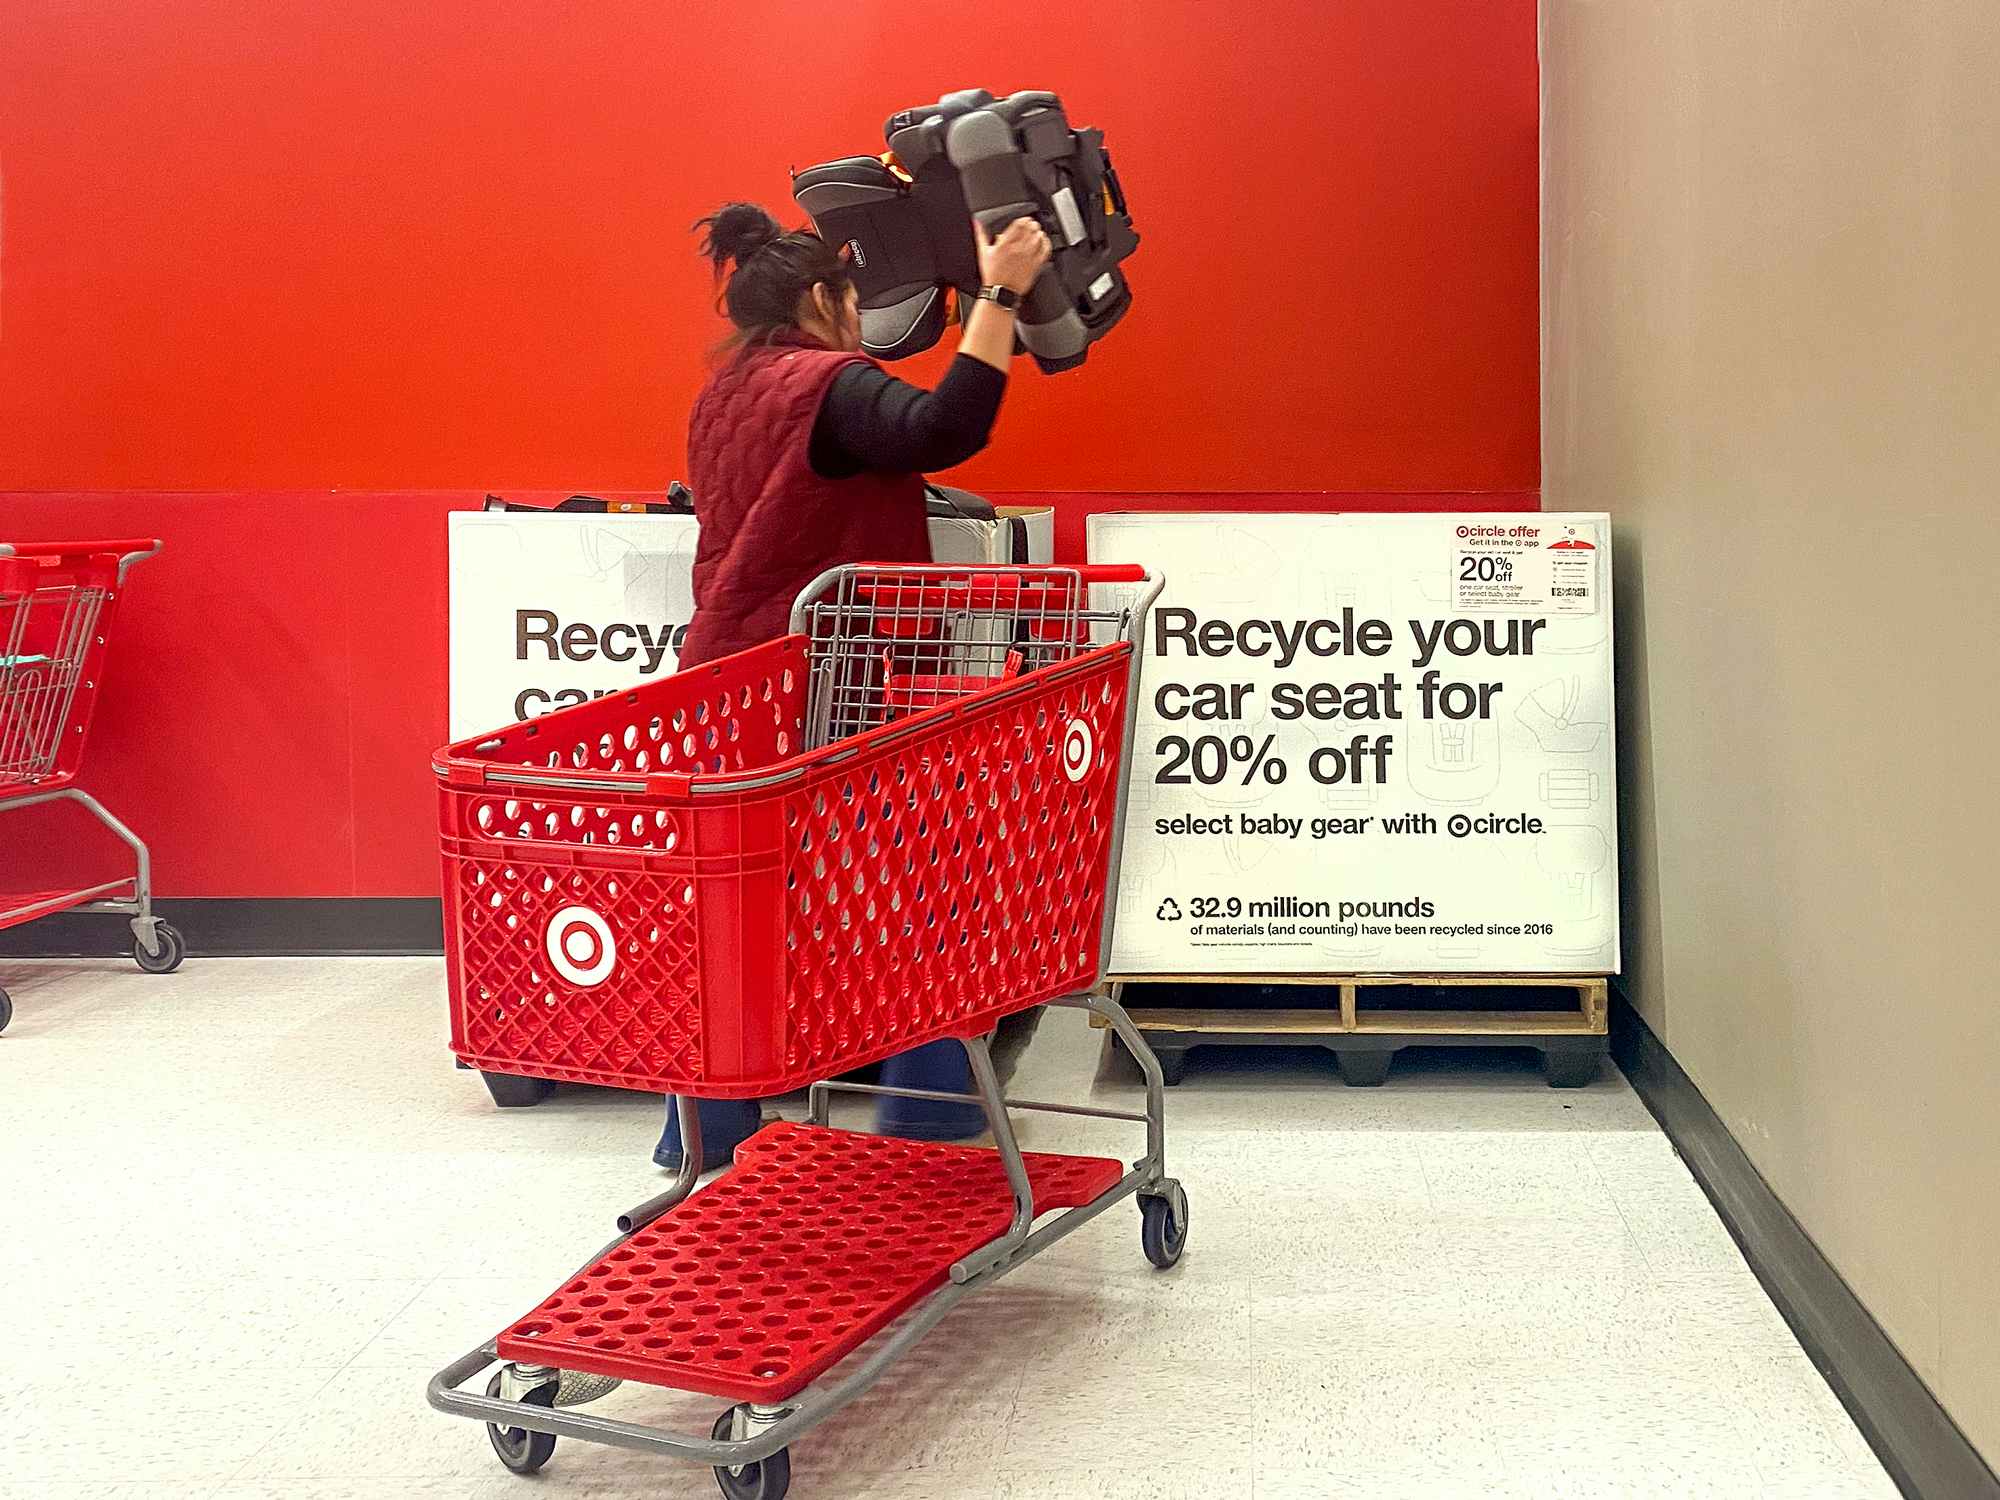 target employee placing car seats into box for trade-in event in store